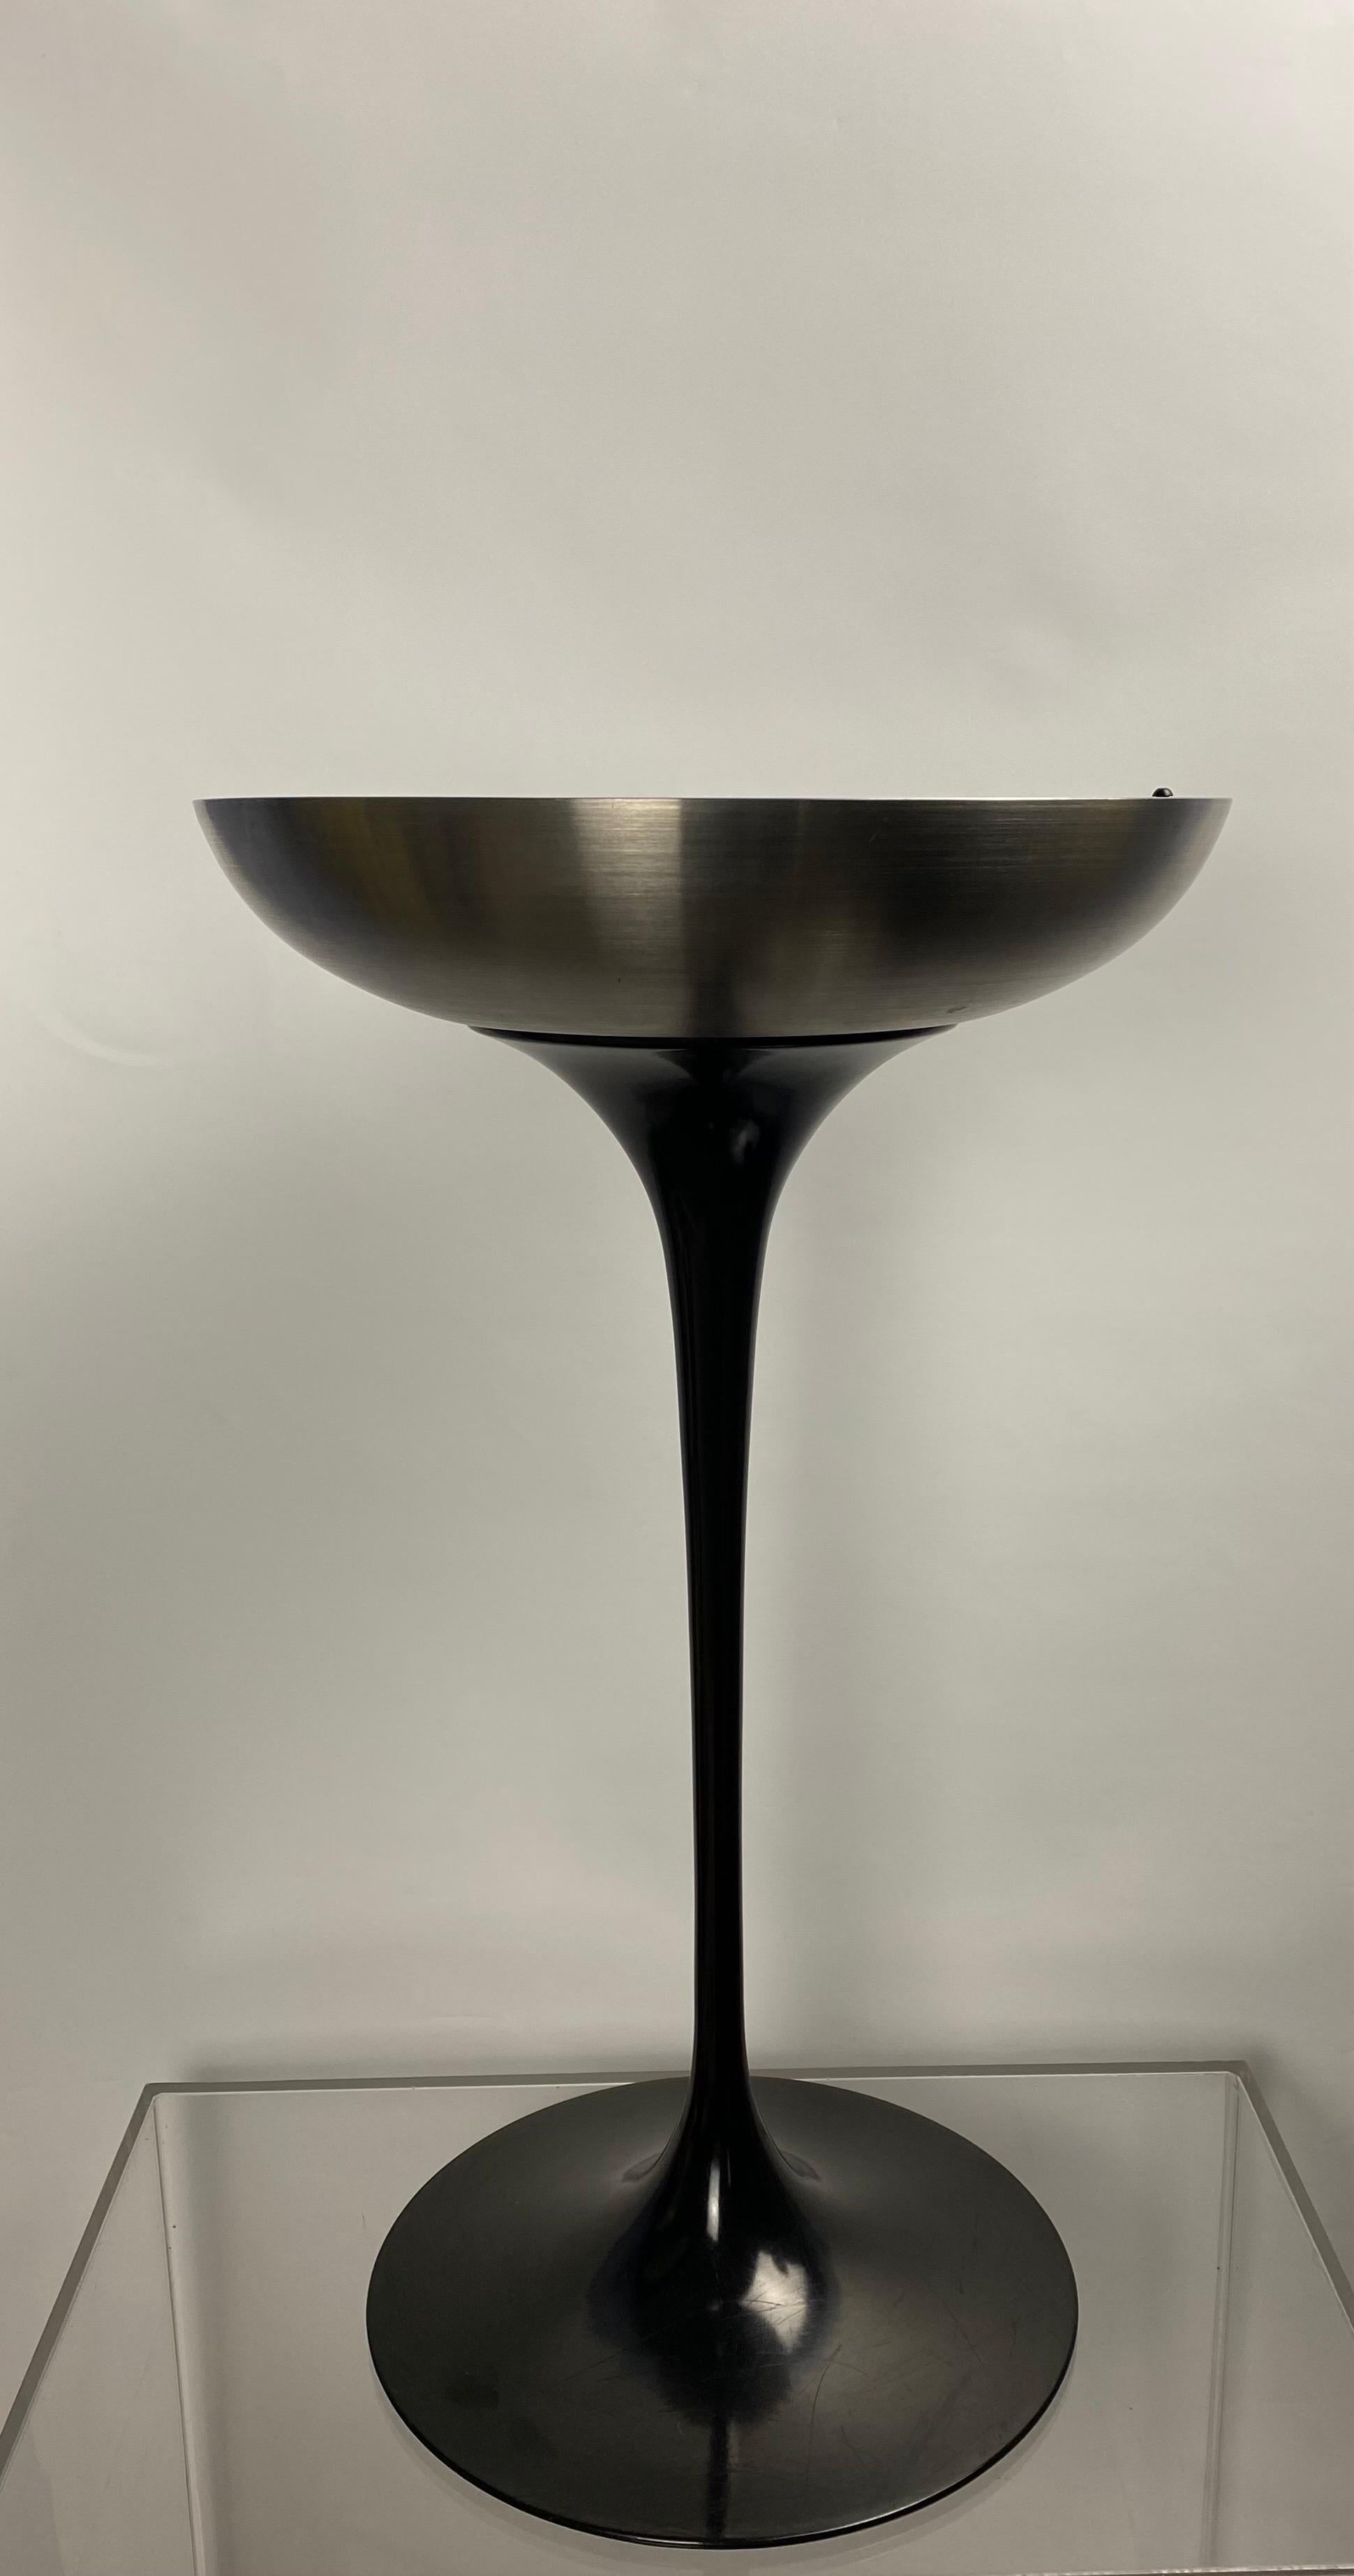 A rare black Version of the Eero Saarinen Tulip Pedestal Ashtray for Knoll International from the 1970s.
Made in combination of cast aluminium and stainless steel this tulip pedestal stand is a very stylish and elegant way to hide the remains of